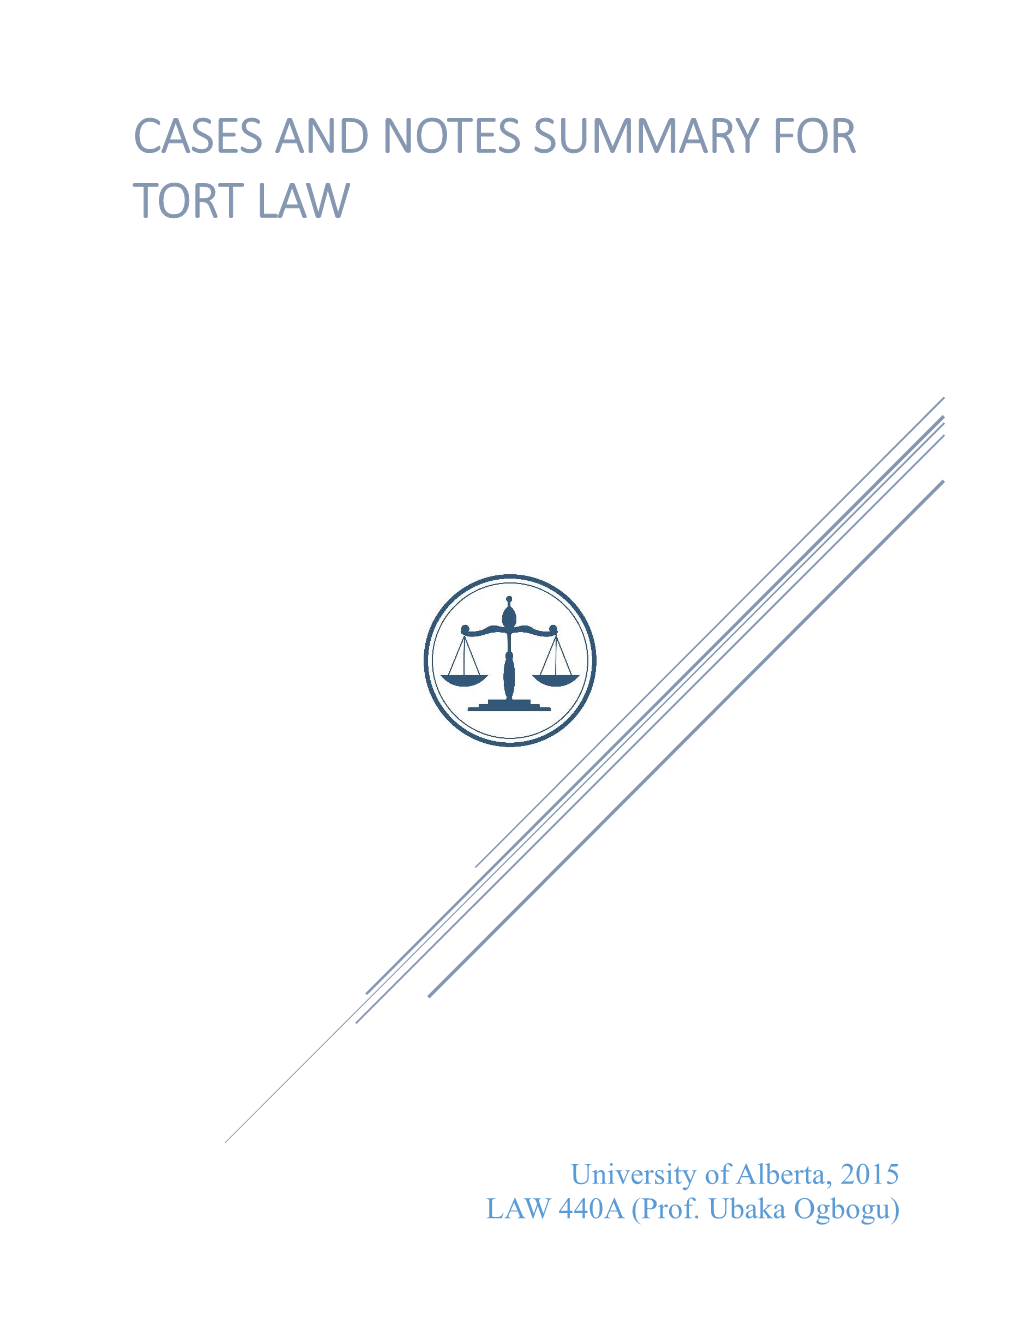 Cases and Notes Summary for Tort Law